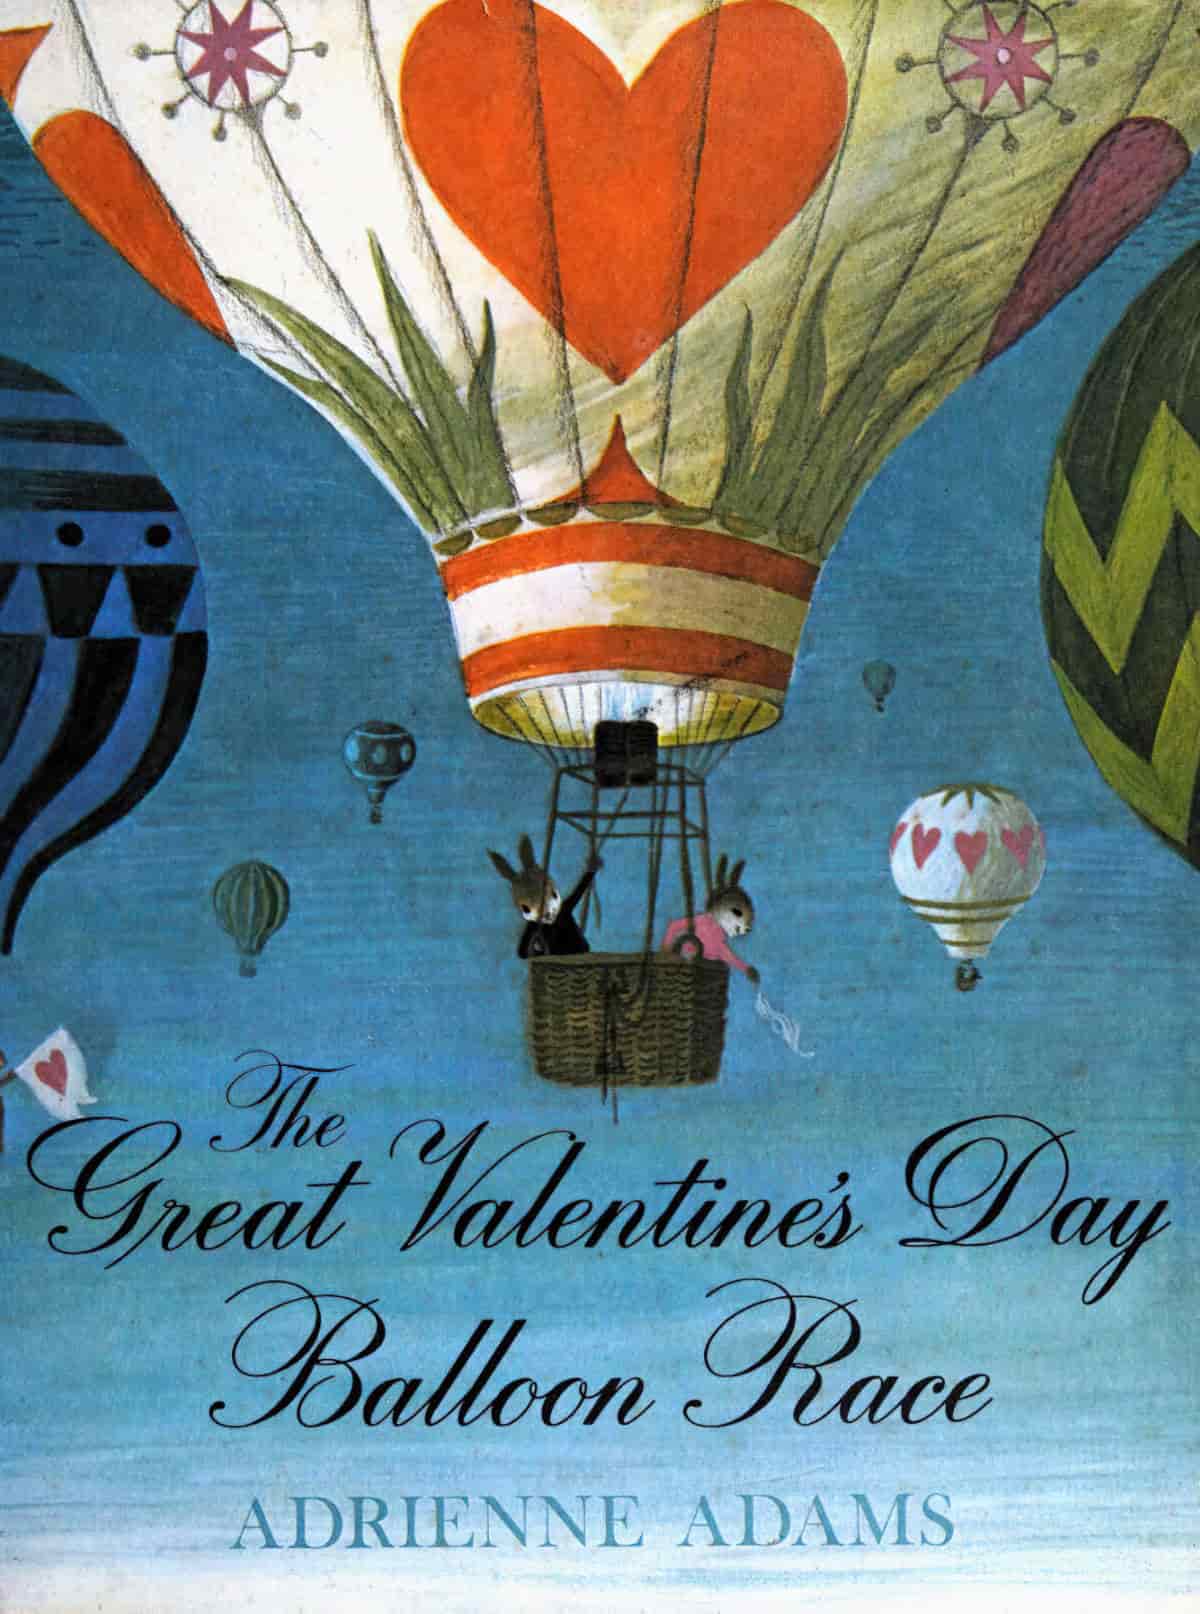 The Great Valentine’s Day Balloon Race by Adrienne Adams 1980 Picture Book